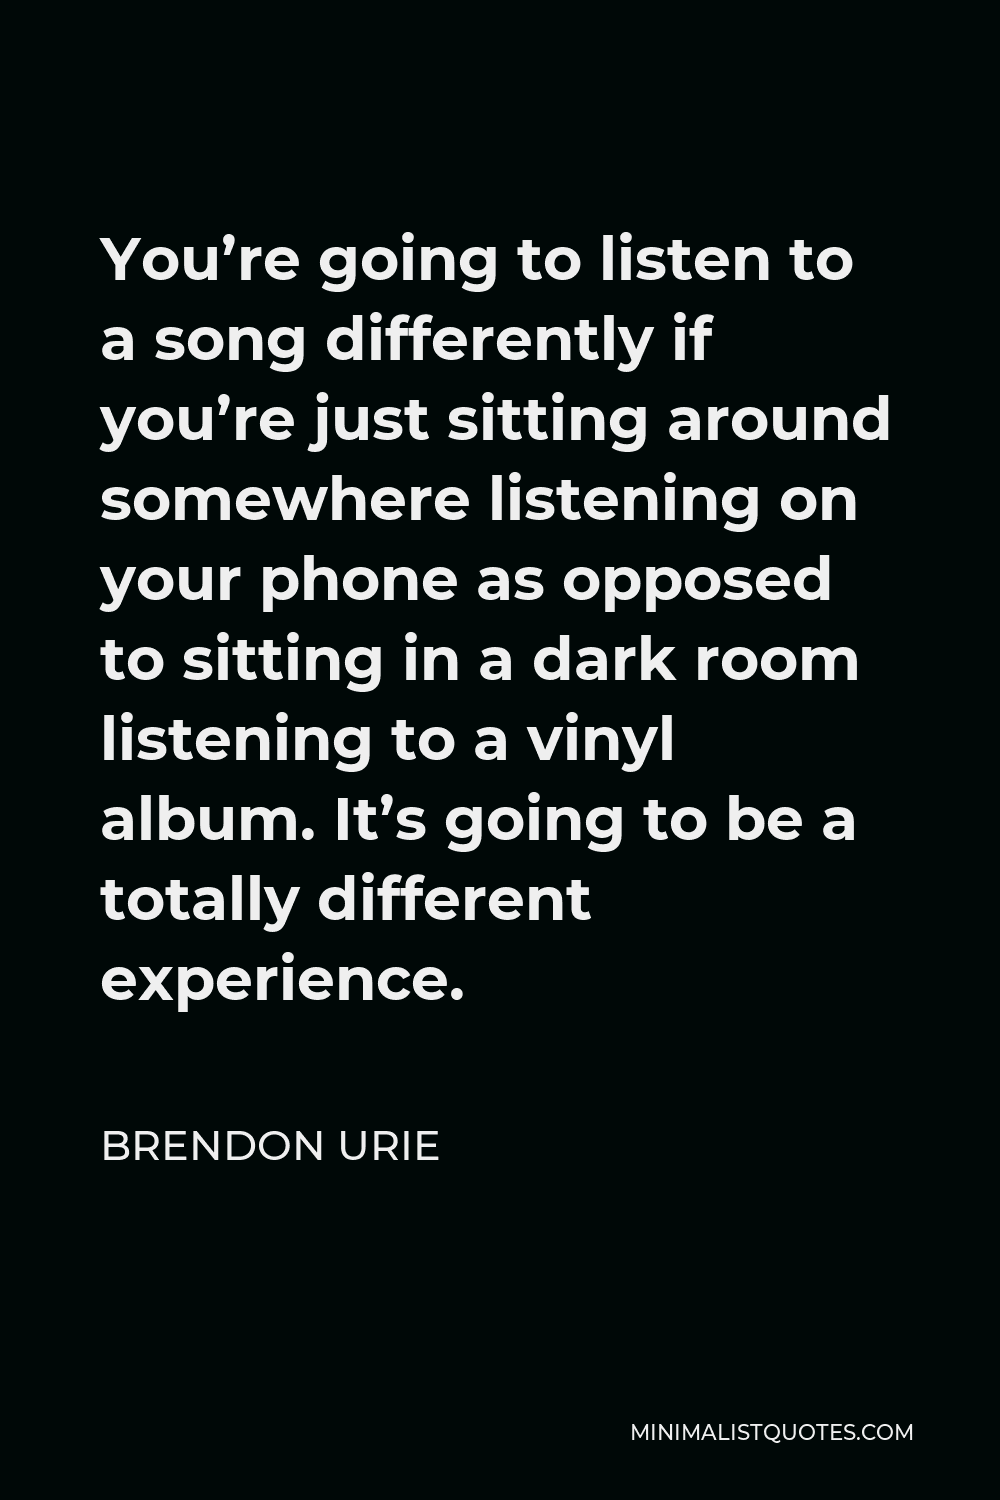 Brendon Urie Quote - You’re going to listen to a song differently if you’re just sitting around somewhere listening on your phone as opposed to sitting in a dark room listening to a vinyl album. It’s going to be a totally different experience.